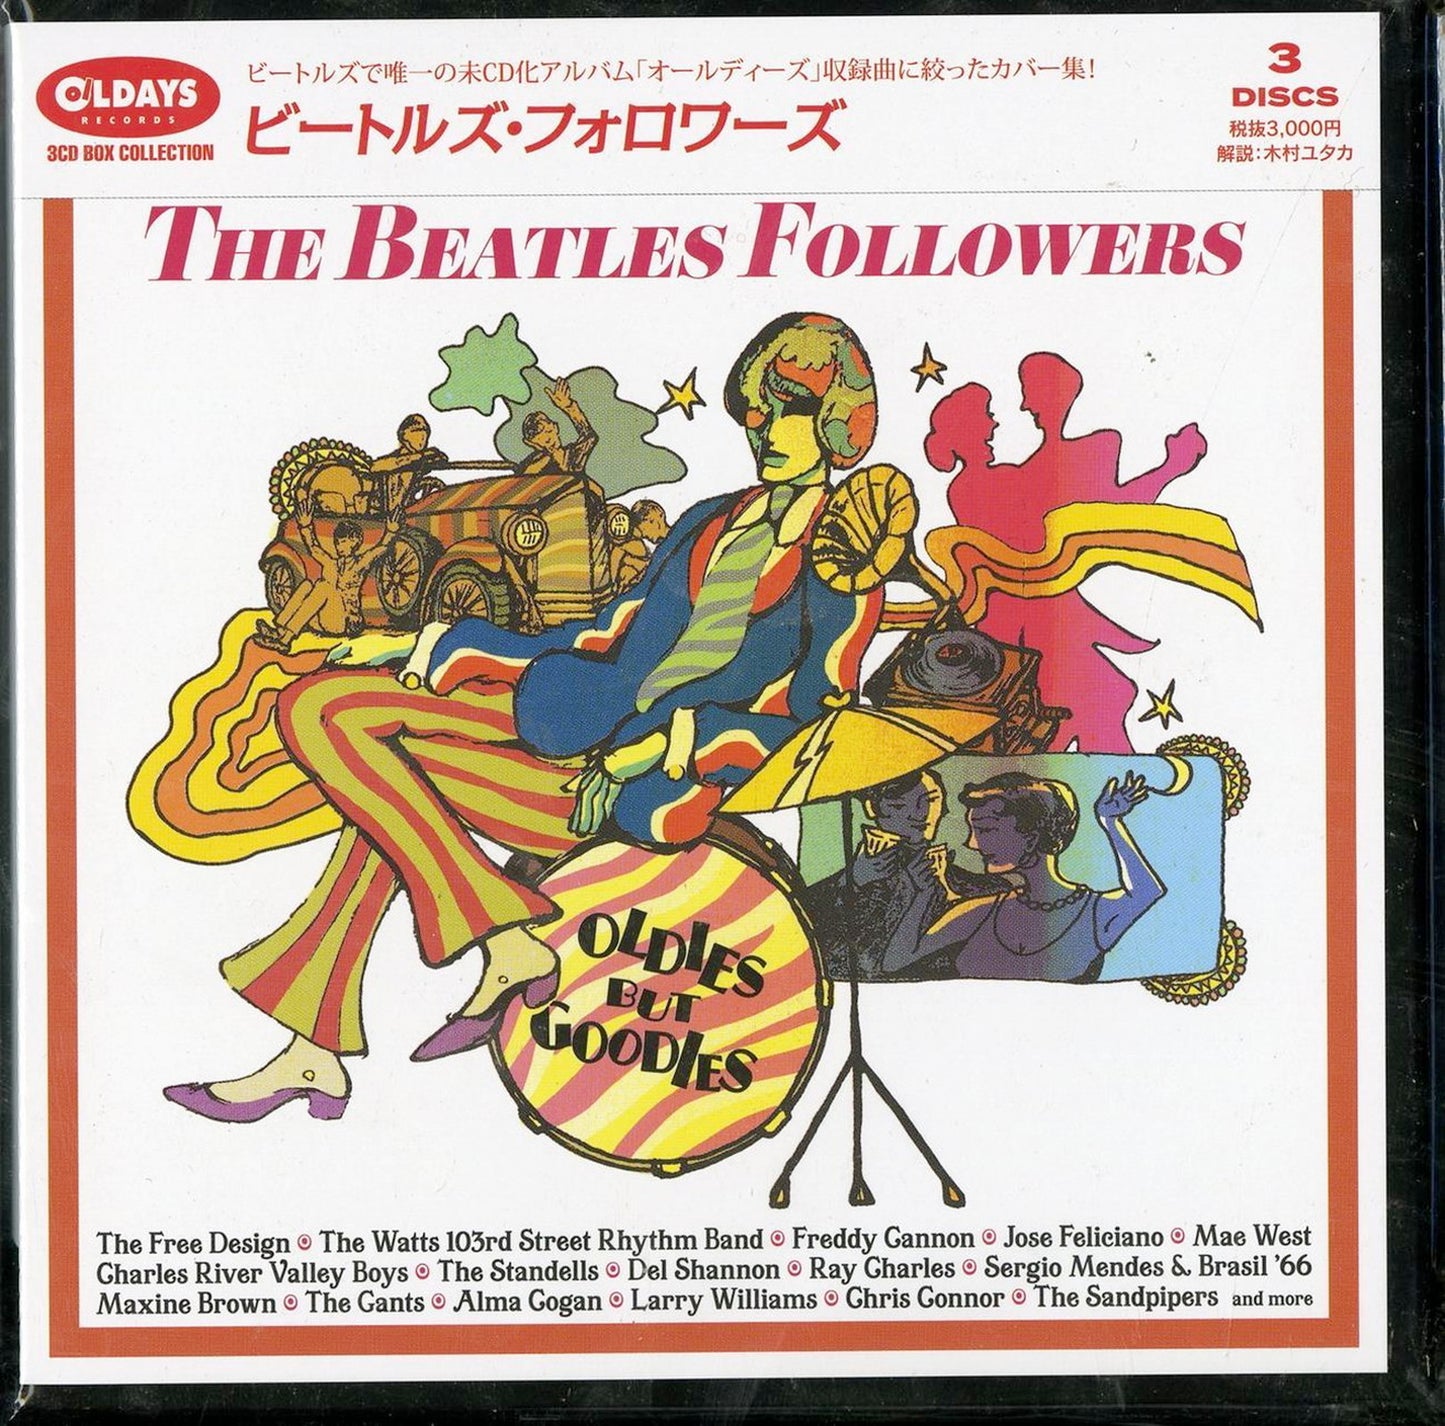 V.A. - The Beatles Followers Collection Of Beatles Cover Songs - Japan 3 Mini LP CD